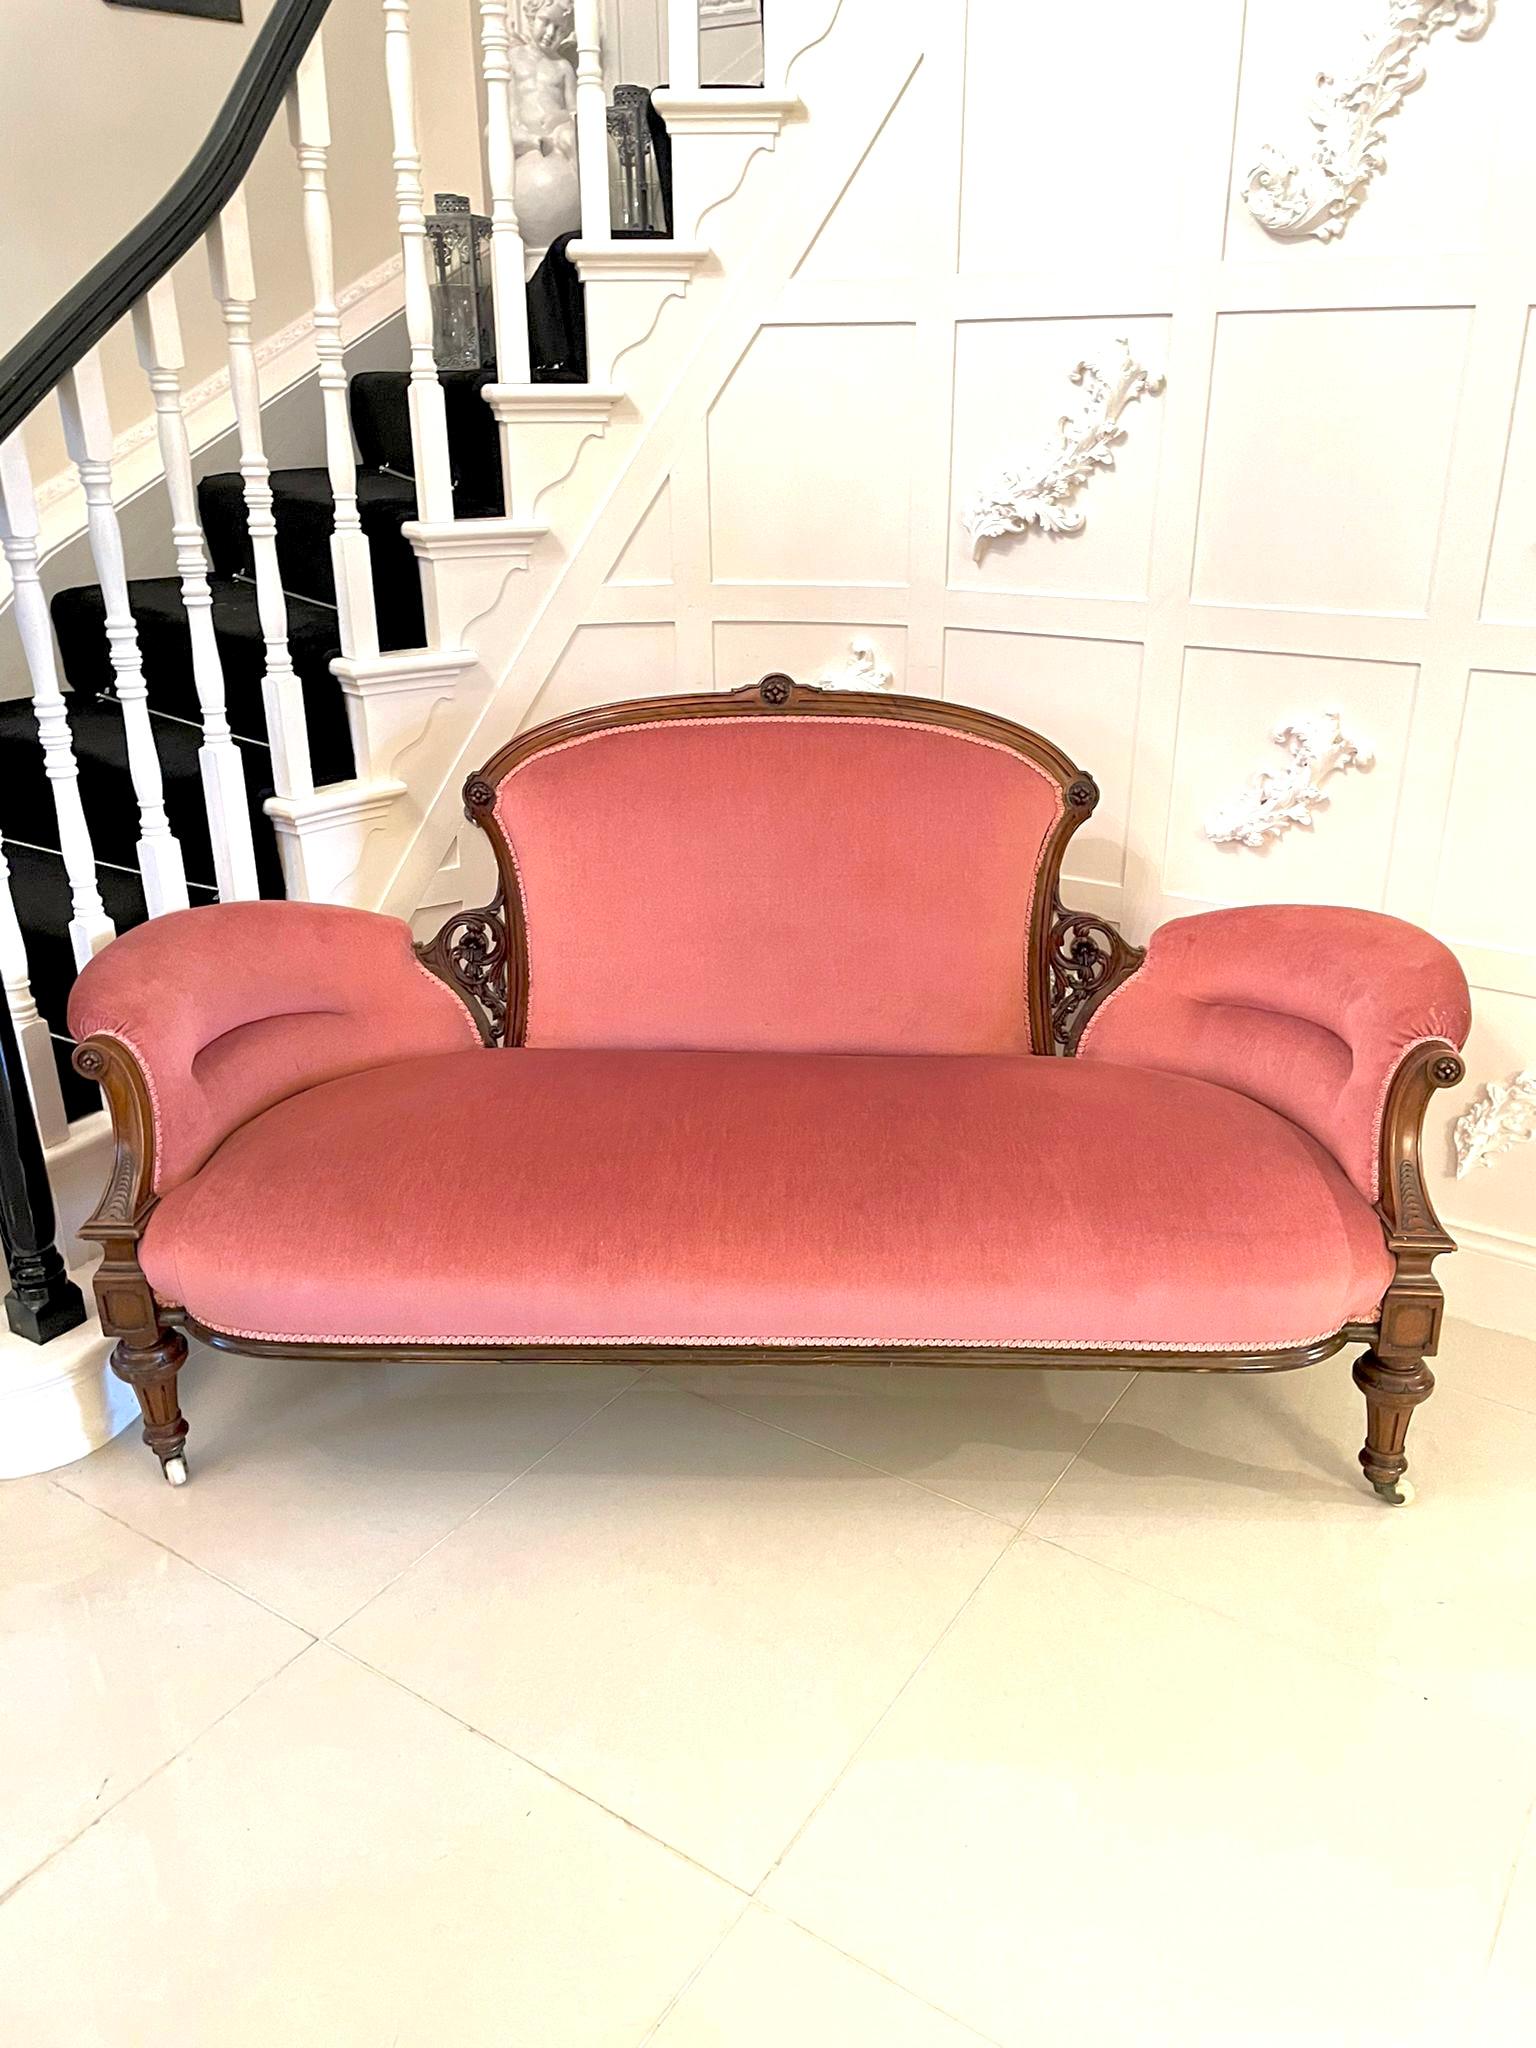 Quality 19th century antique Victorian walnut settee having a quality solid walnut carved shaped frame raised on turned reeded legs to the front out swept back with original casters, upholstered in pink fabric. 

H 95cm 
W 167.5cm 
D 69cm
H to